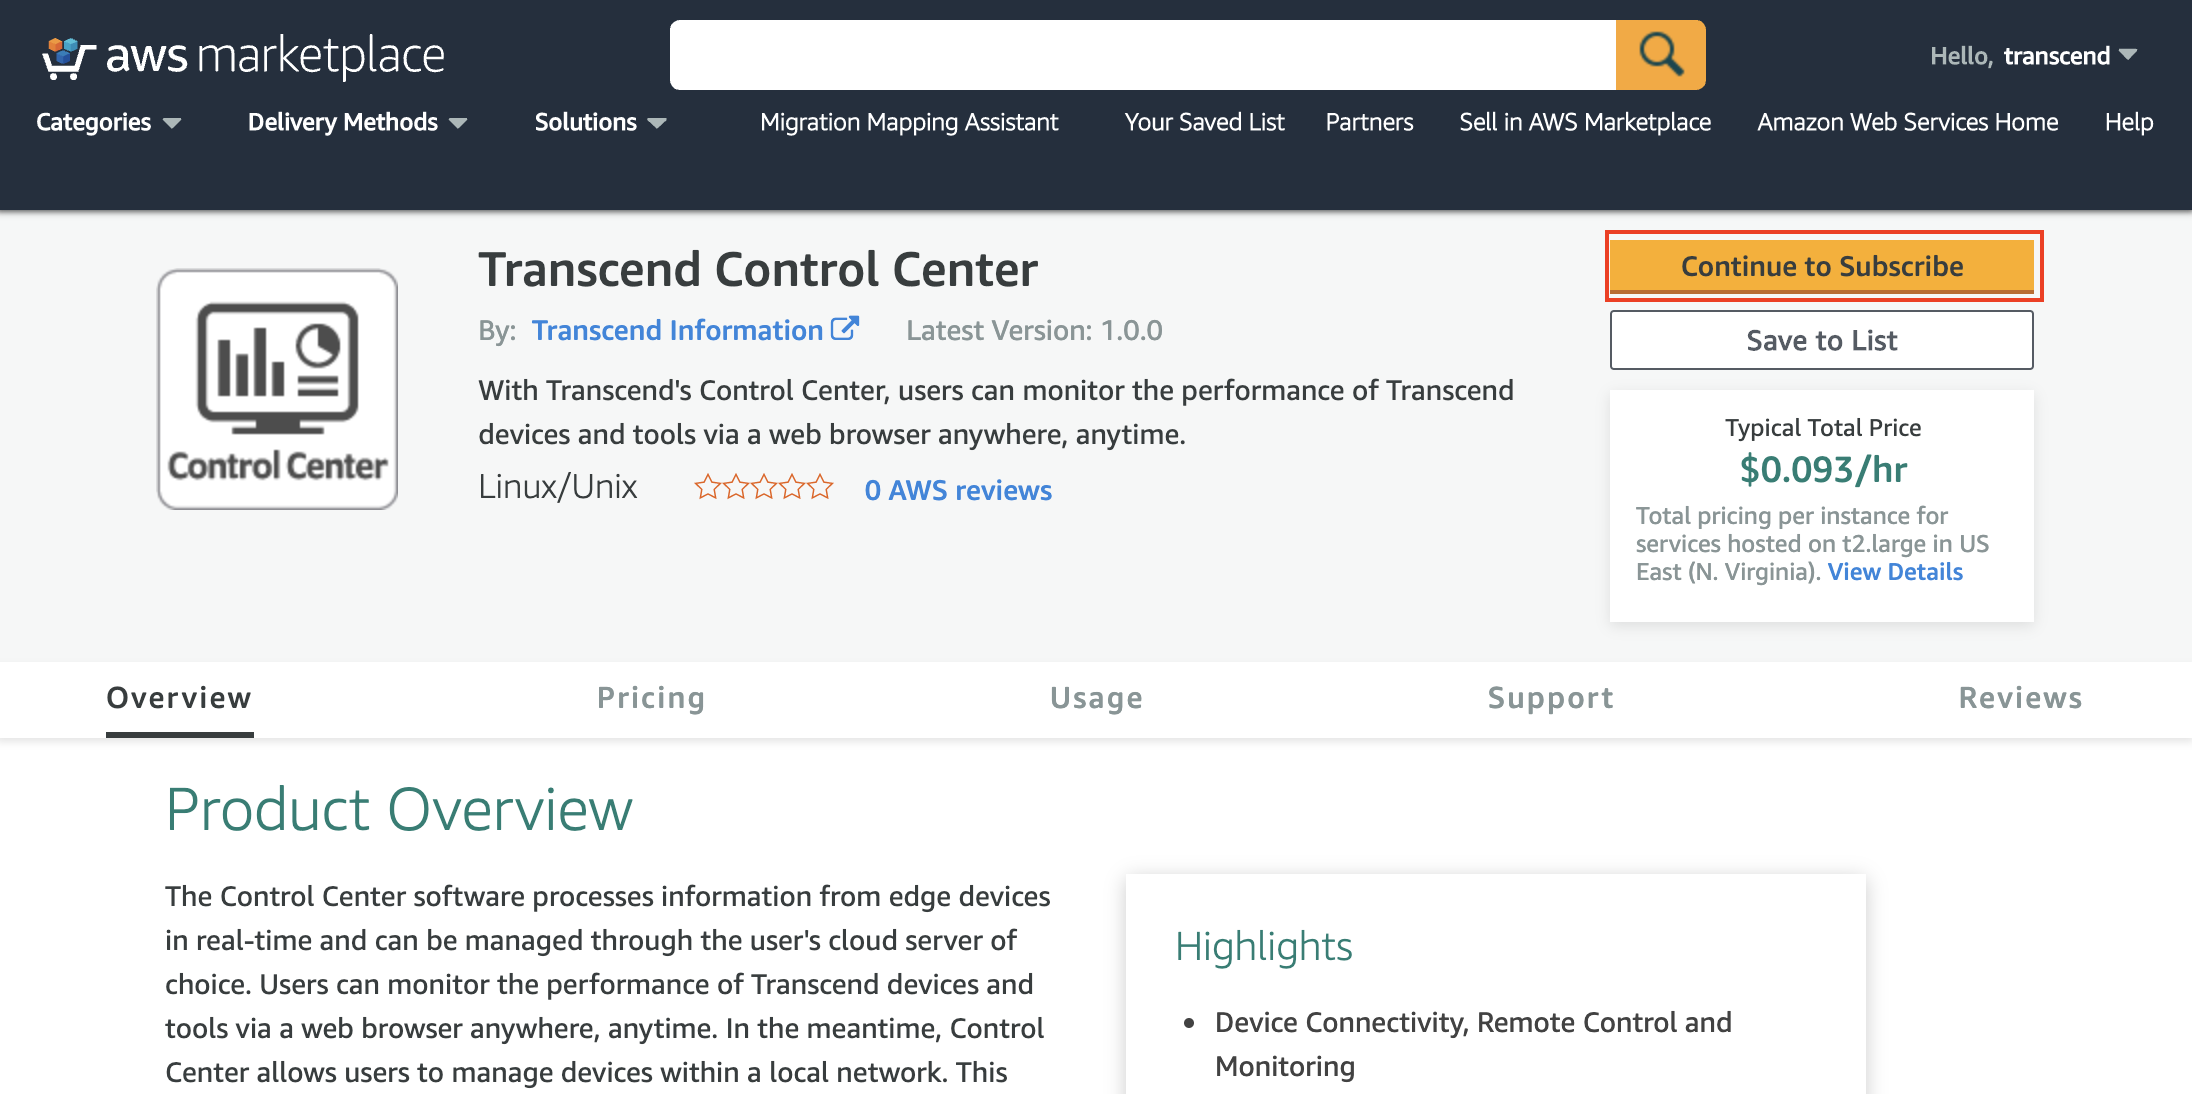 Transcend is now available in AWS Marketplace